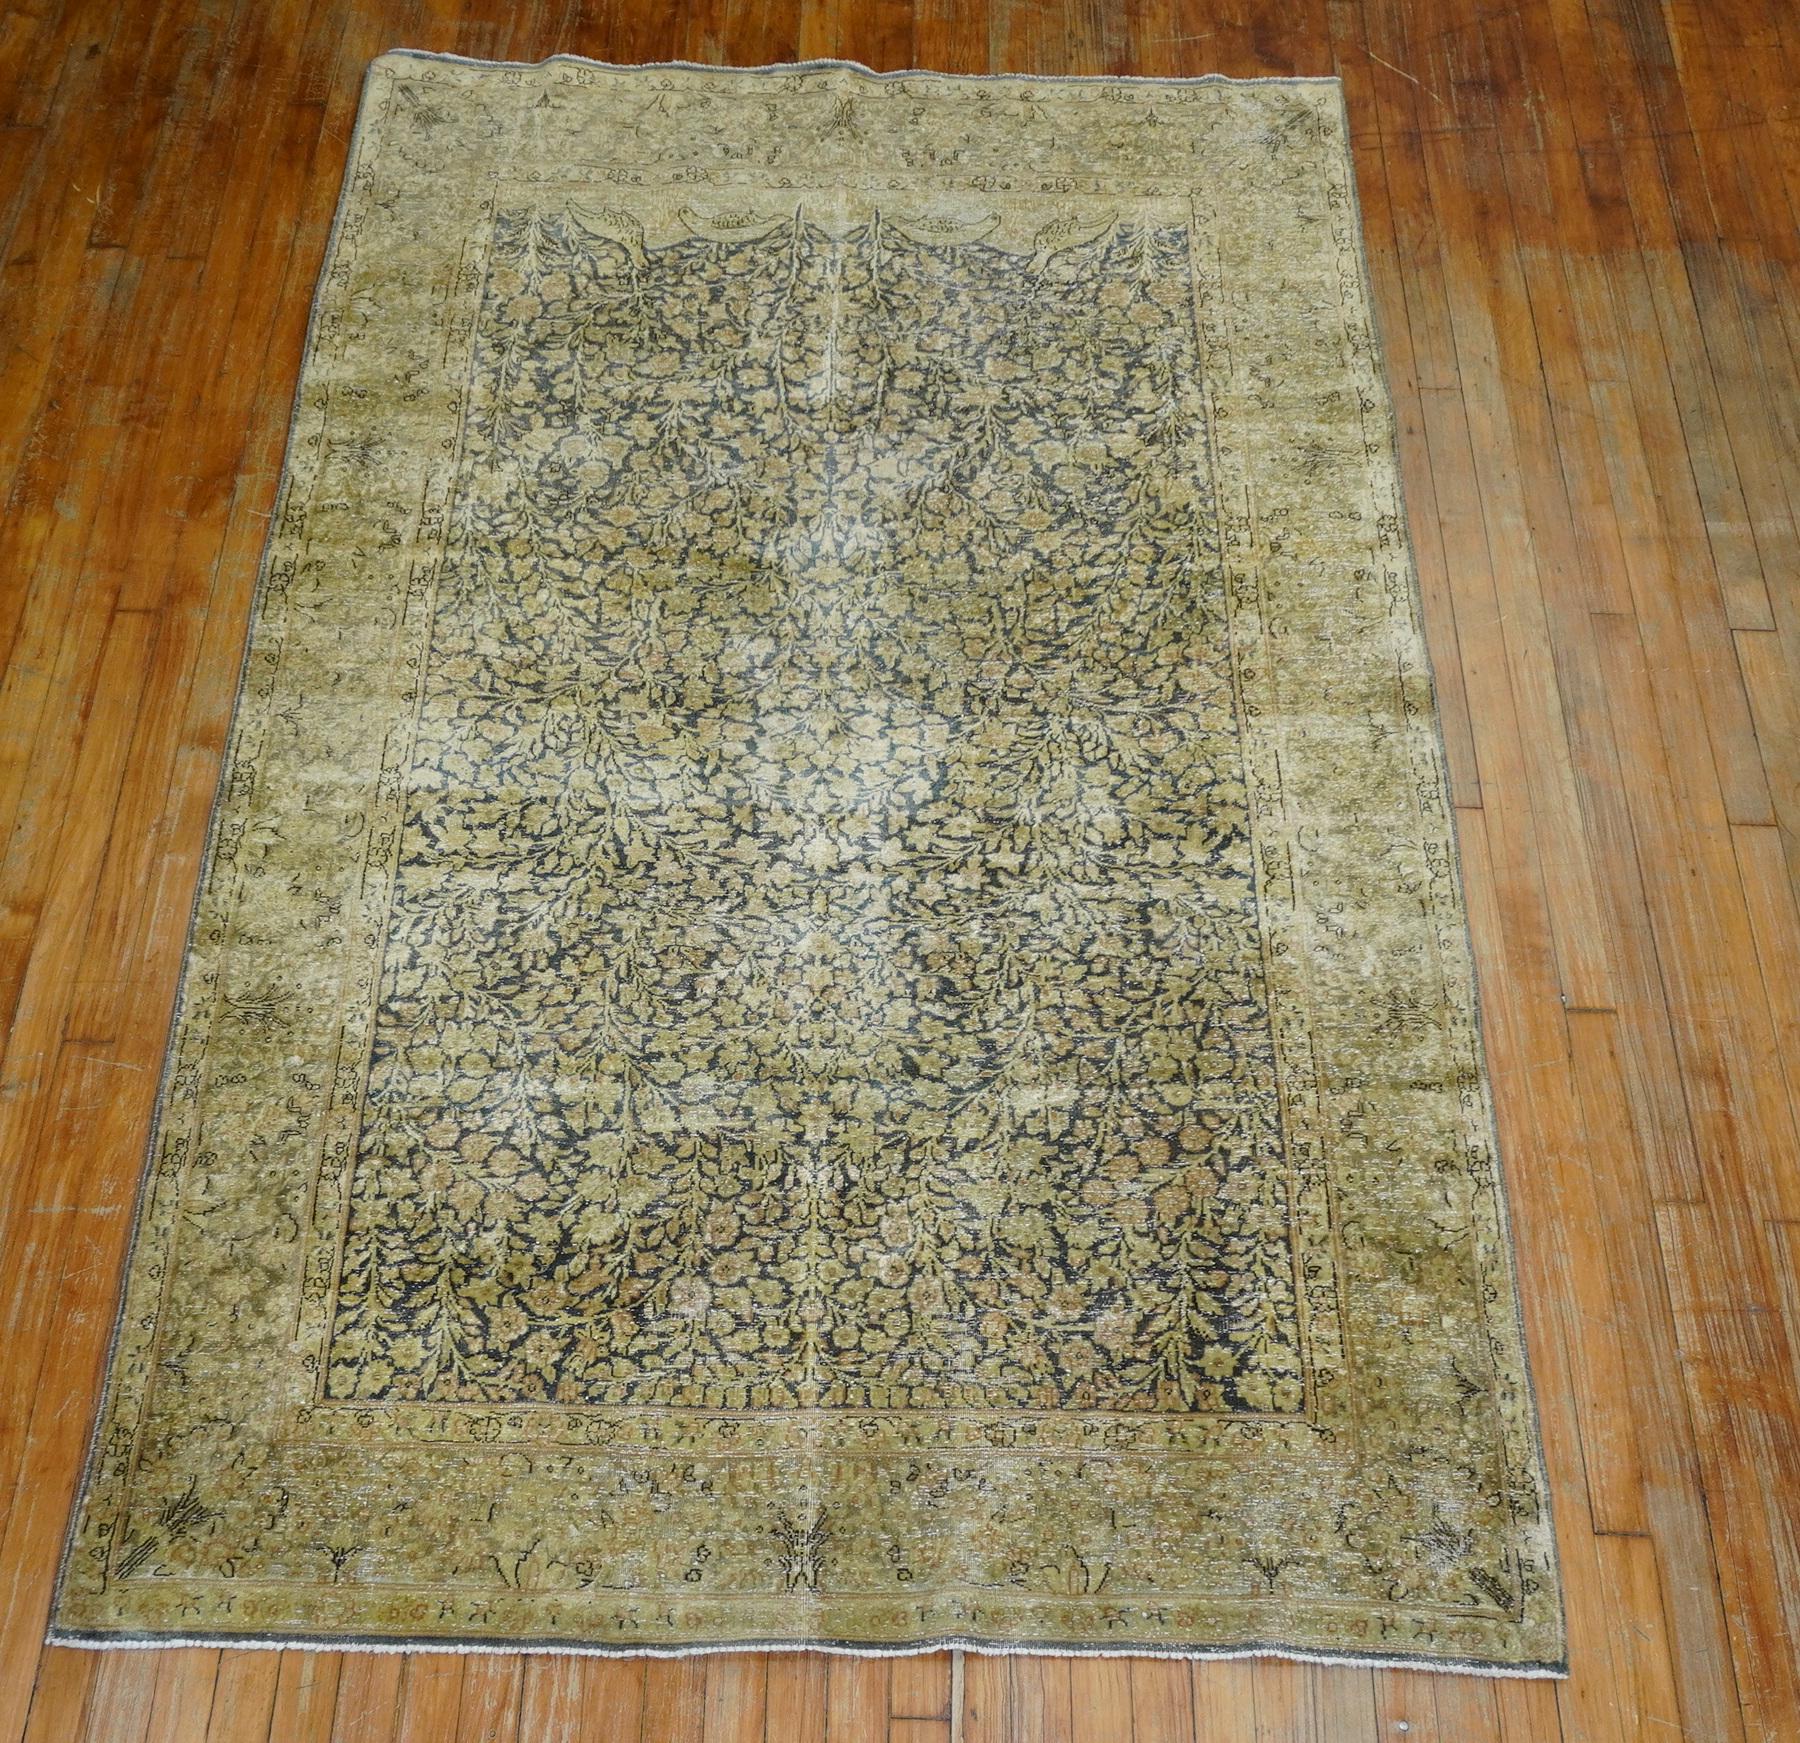 Matching pair of early 20th century antique Persian Kerman rugs with one measuring 4'11” x 8” and the other measuring 4'9” x 8'2”. Both pieces have wear and come off in green and gold hues.